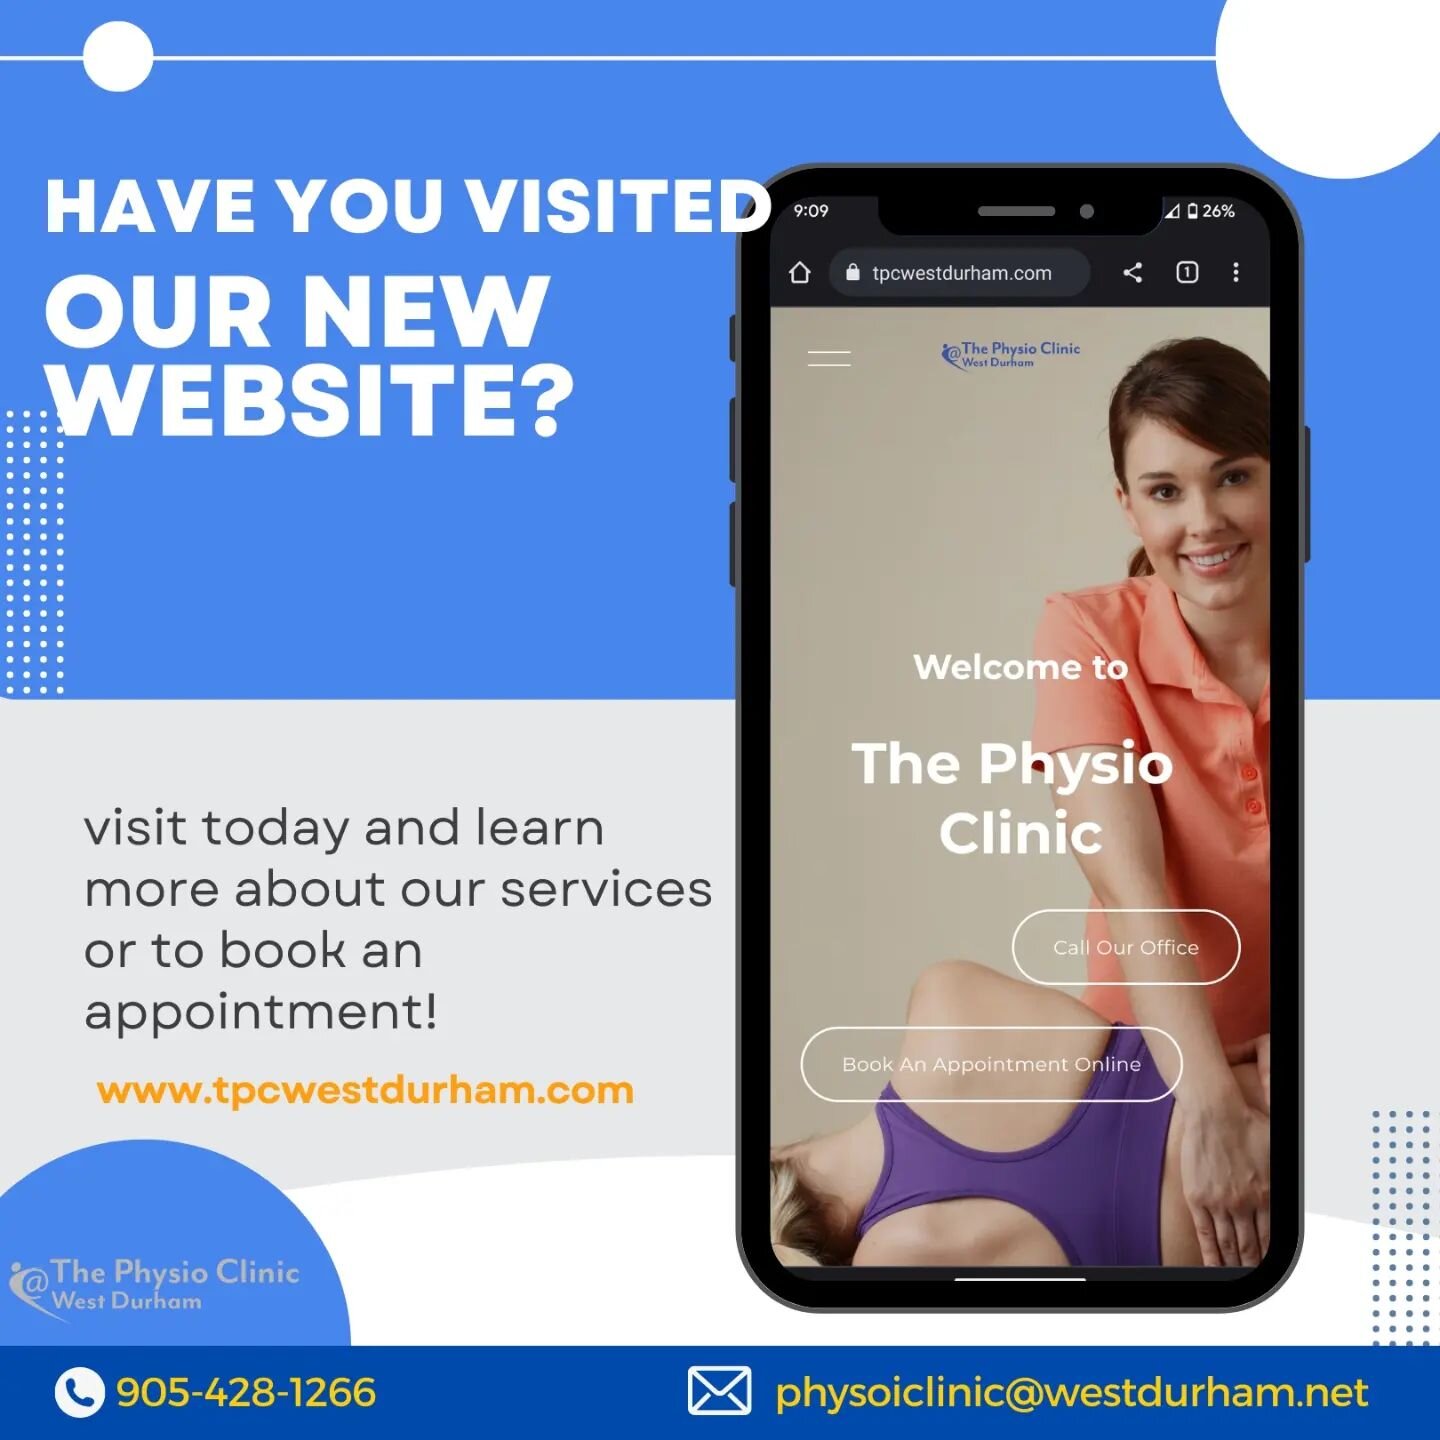 Have you visited our new website?

Explore our newly redesigned website and learn more about each of our services, clinic information, or book an appointment online!

Link in bio!

Contact us today to learn more about our services!
👇
905.428.1266
ph